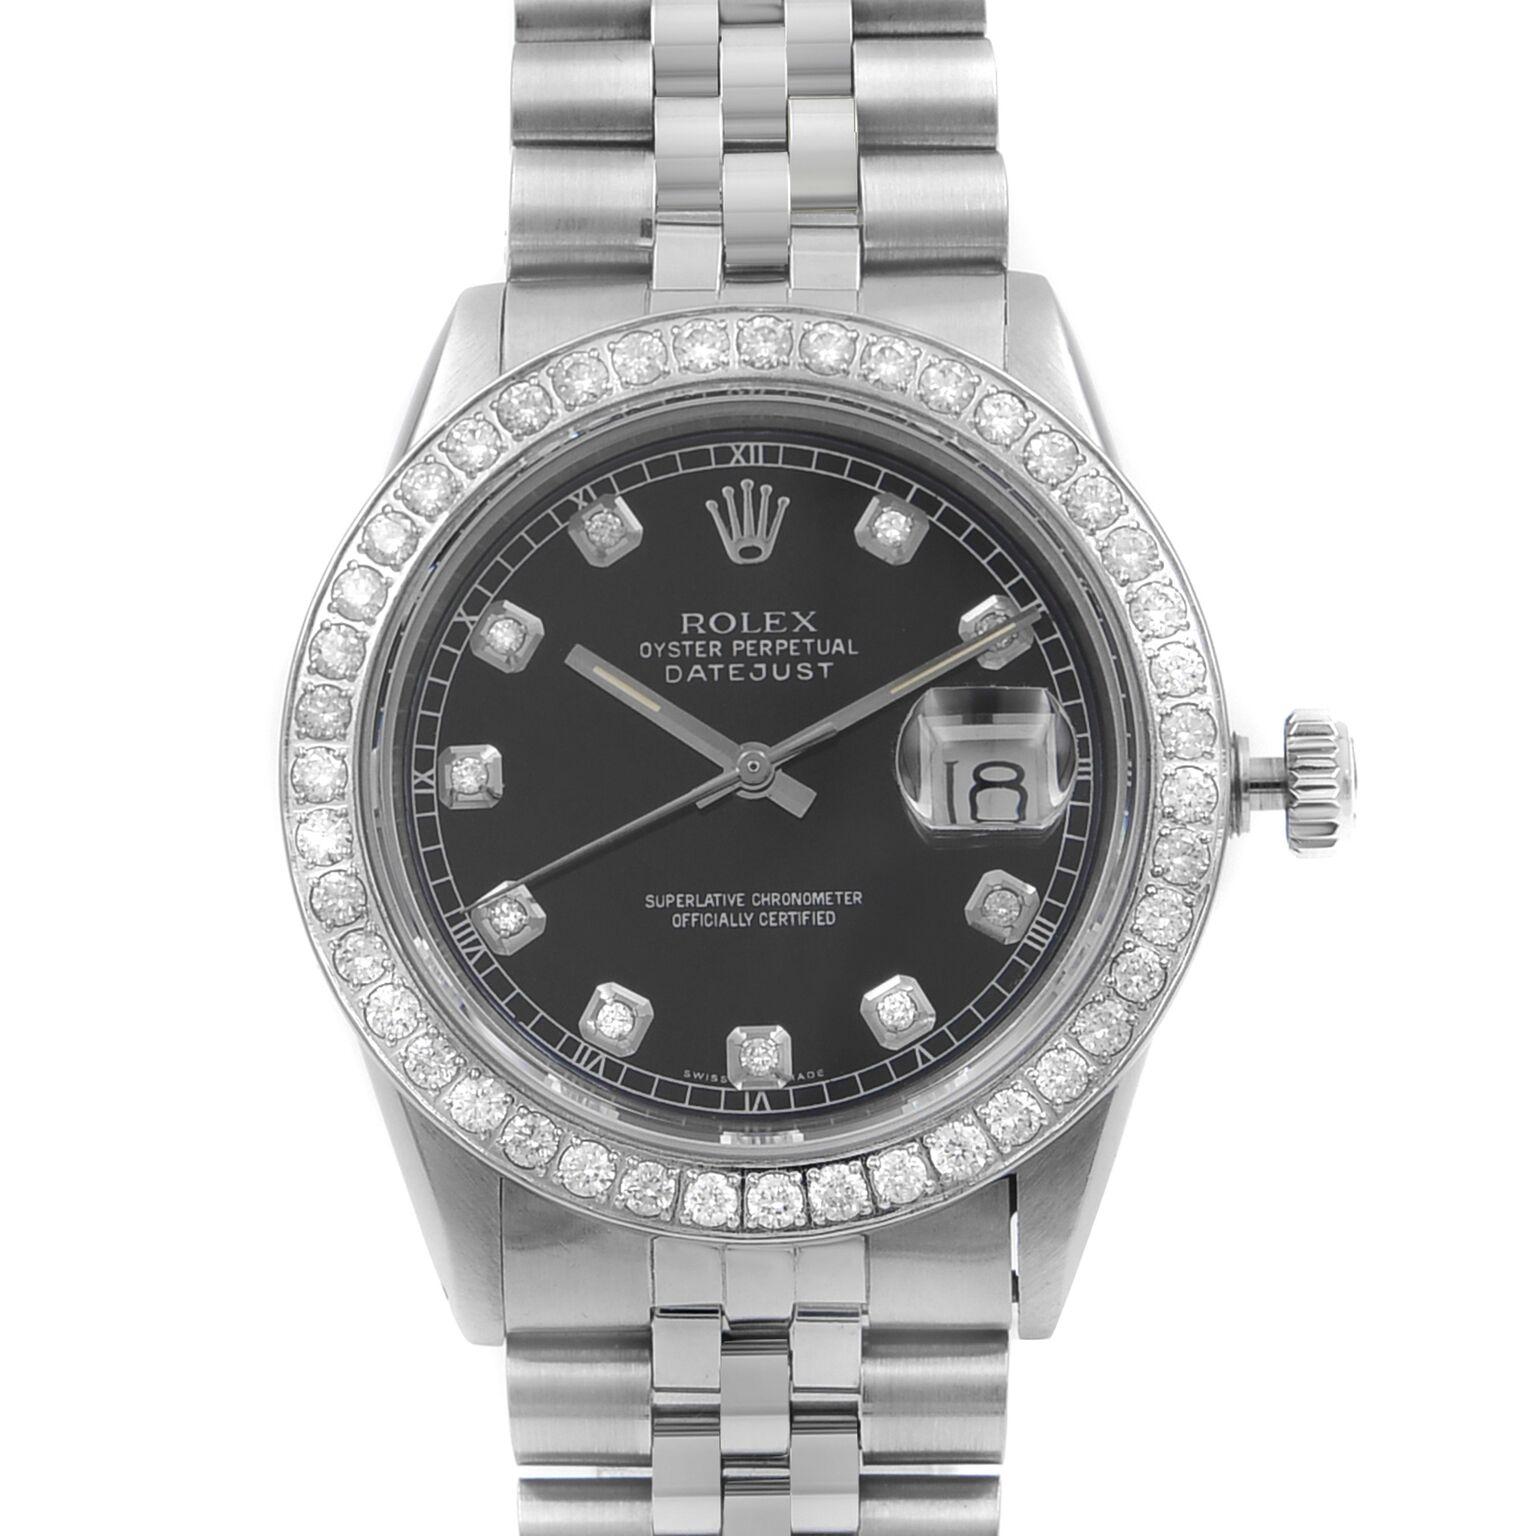 This pre-owned Rolex Datejust  16014  is a beautiful men's timepiece that is powered by an automatic movement which is cased in a stainless steel case. It has a round shape face, date, diamonds dial and has hand diamonds style markers. It is